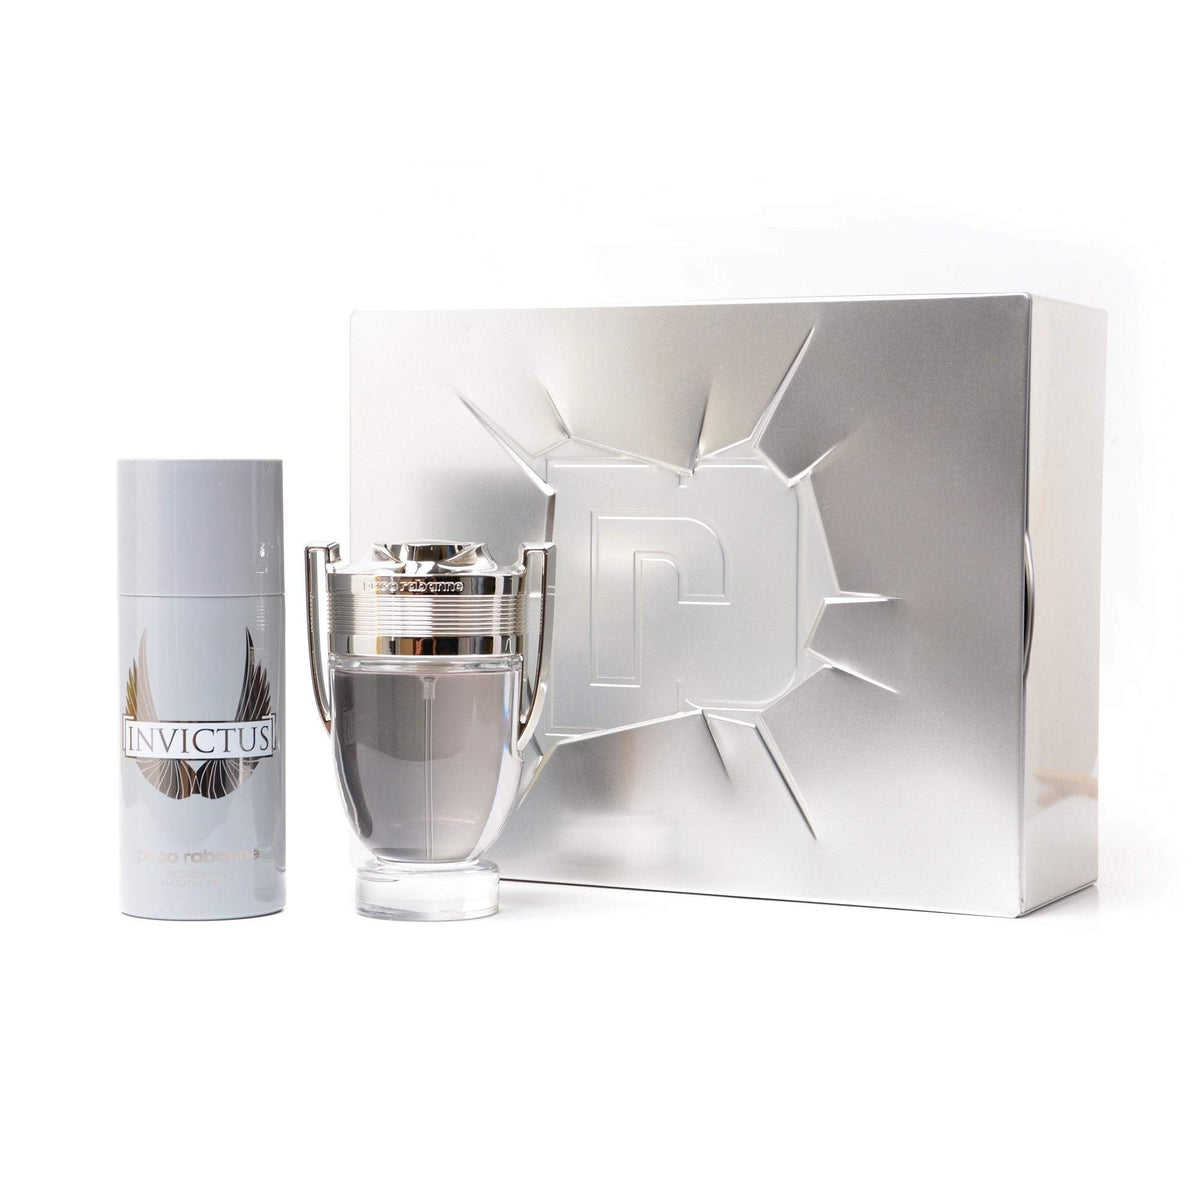 Invictus Set for Men by Paco Rabanne